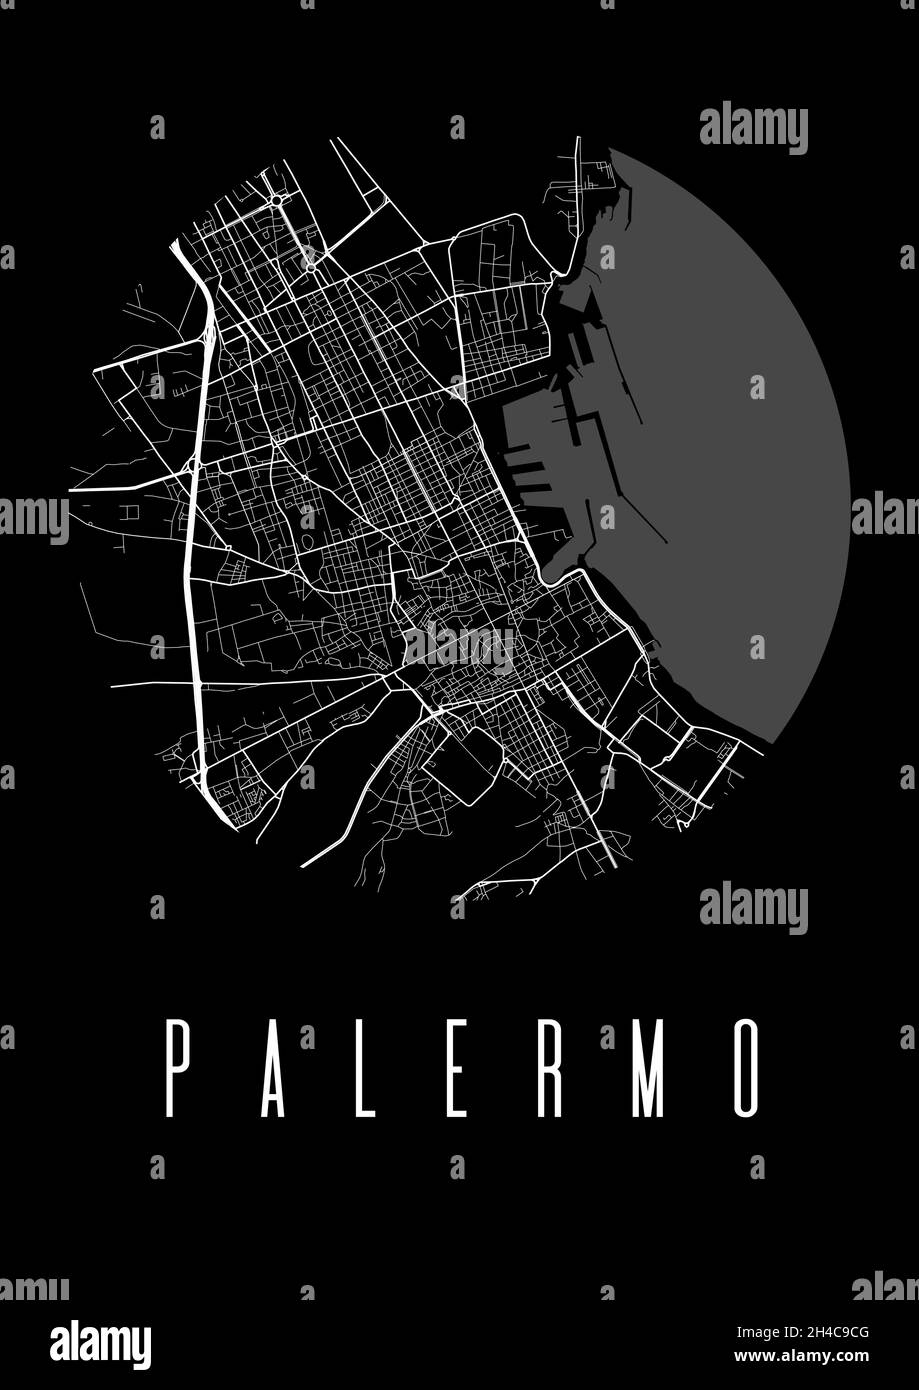 Palermo map vector black poster. Round circular view, street map of Palermo city illustration. Cityscape area panorama silhouette aerial view, typogra Stock Vector